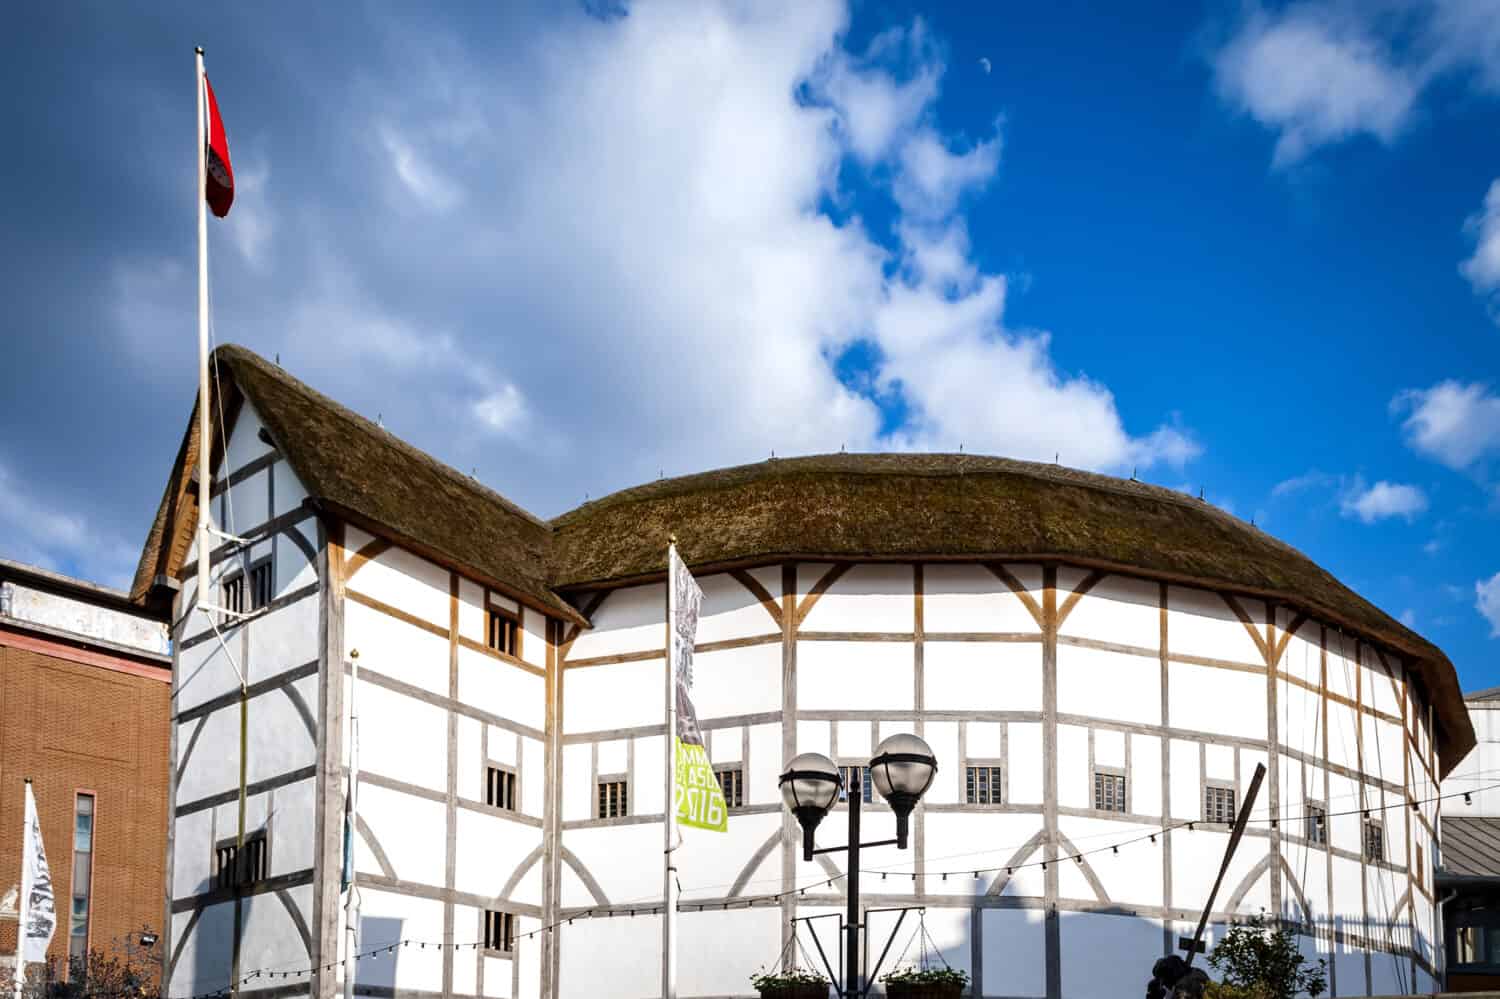 Shakespeare's Globe is the complex housing a reconstruction of the Globe Theatre, an Elizabethan playhouse in the London Borough of Southwark